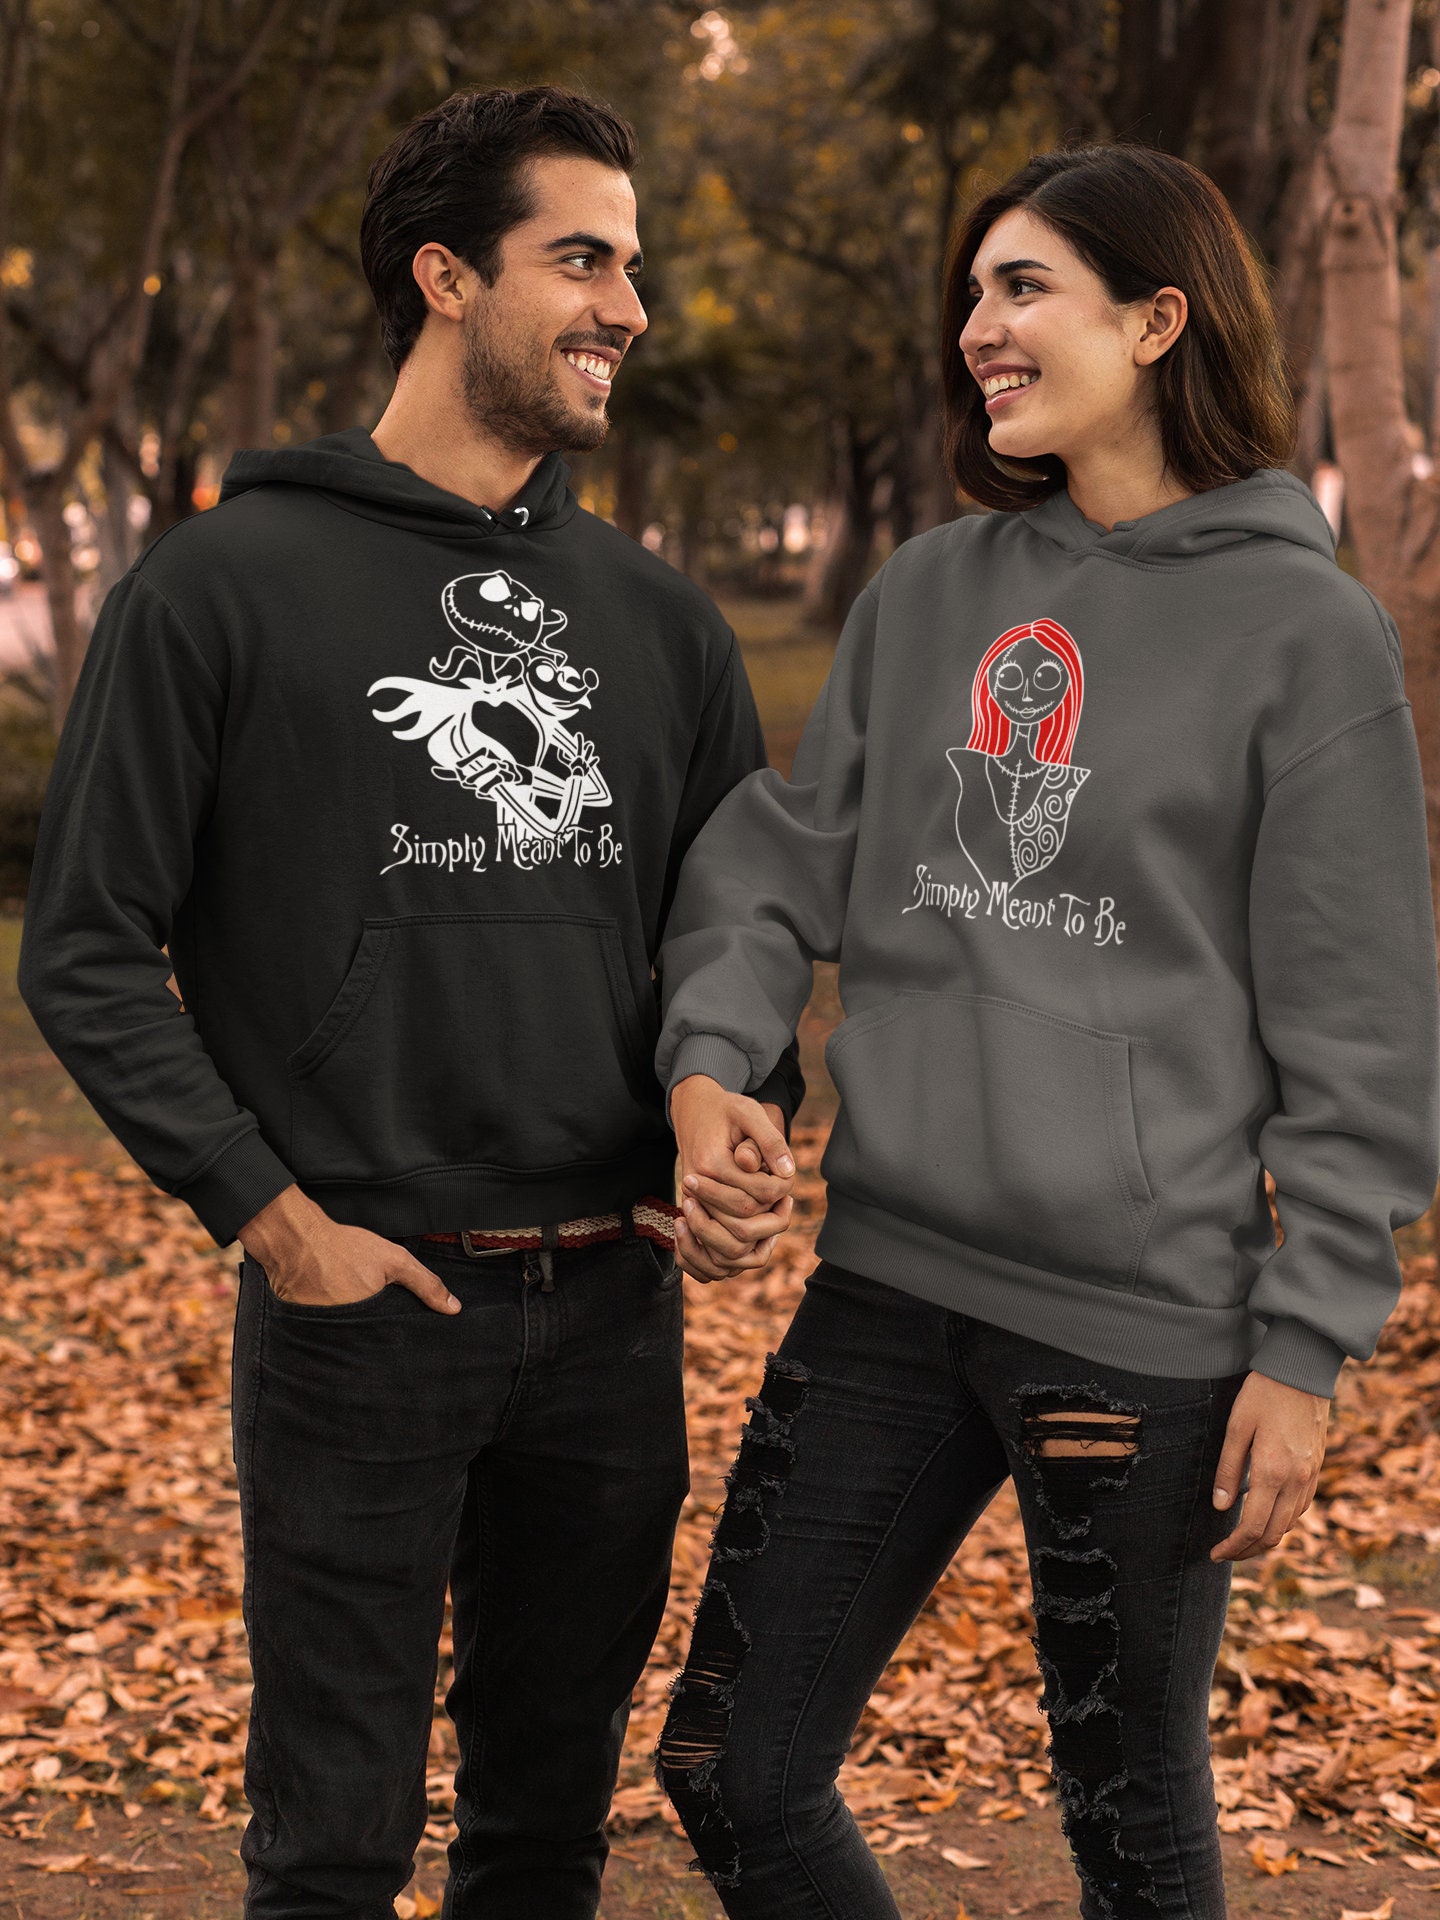 Discover Jack And Sally Simply Meant To Be, The Nightmare Before Christmas, Jack and Sally Couples Matching Halloween Tops, Jack And Sally Hoodie Set